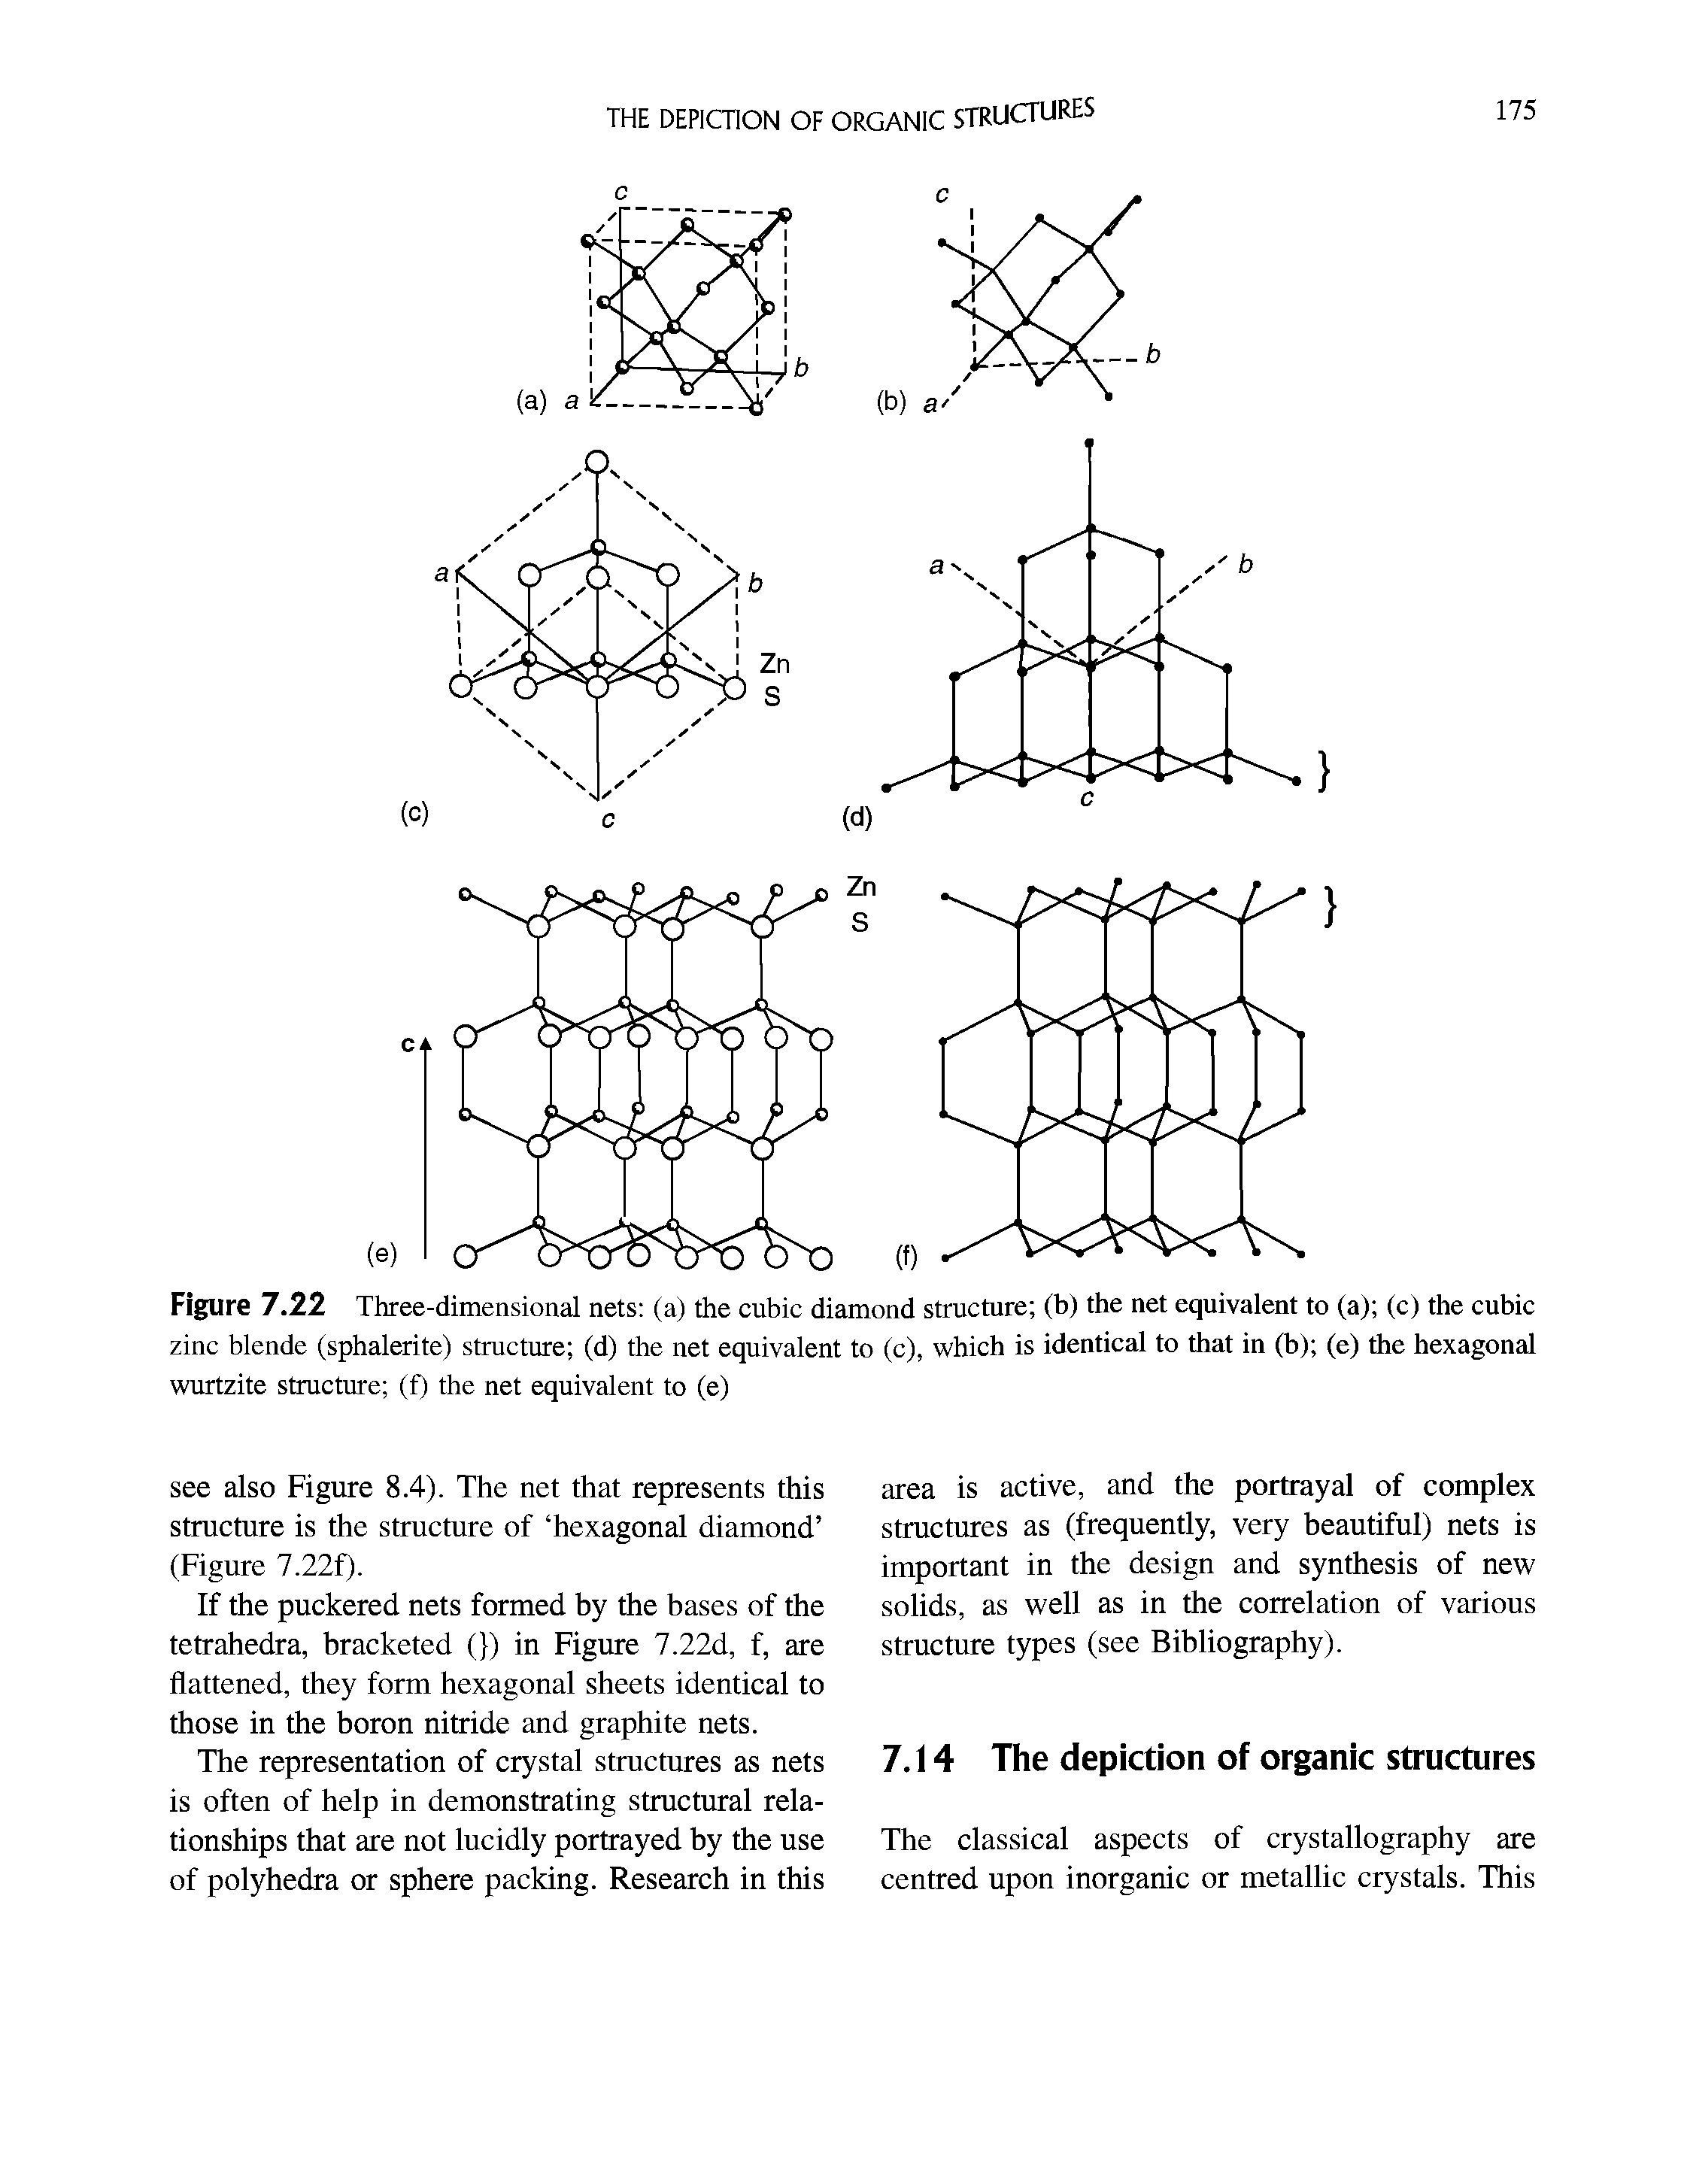 Figure 7.22 Three-dimensional nets (a) the cubic diamond structure (b) the net equivalent to (a) (c) the cubic zinc blende (sphalerite) structure (d) the net equivalent to (c), which is identical to that in (b) (e) the hexagonal wurtzite structure (f) the net equivalent to (e)...